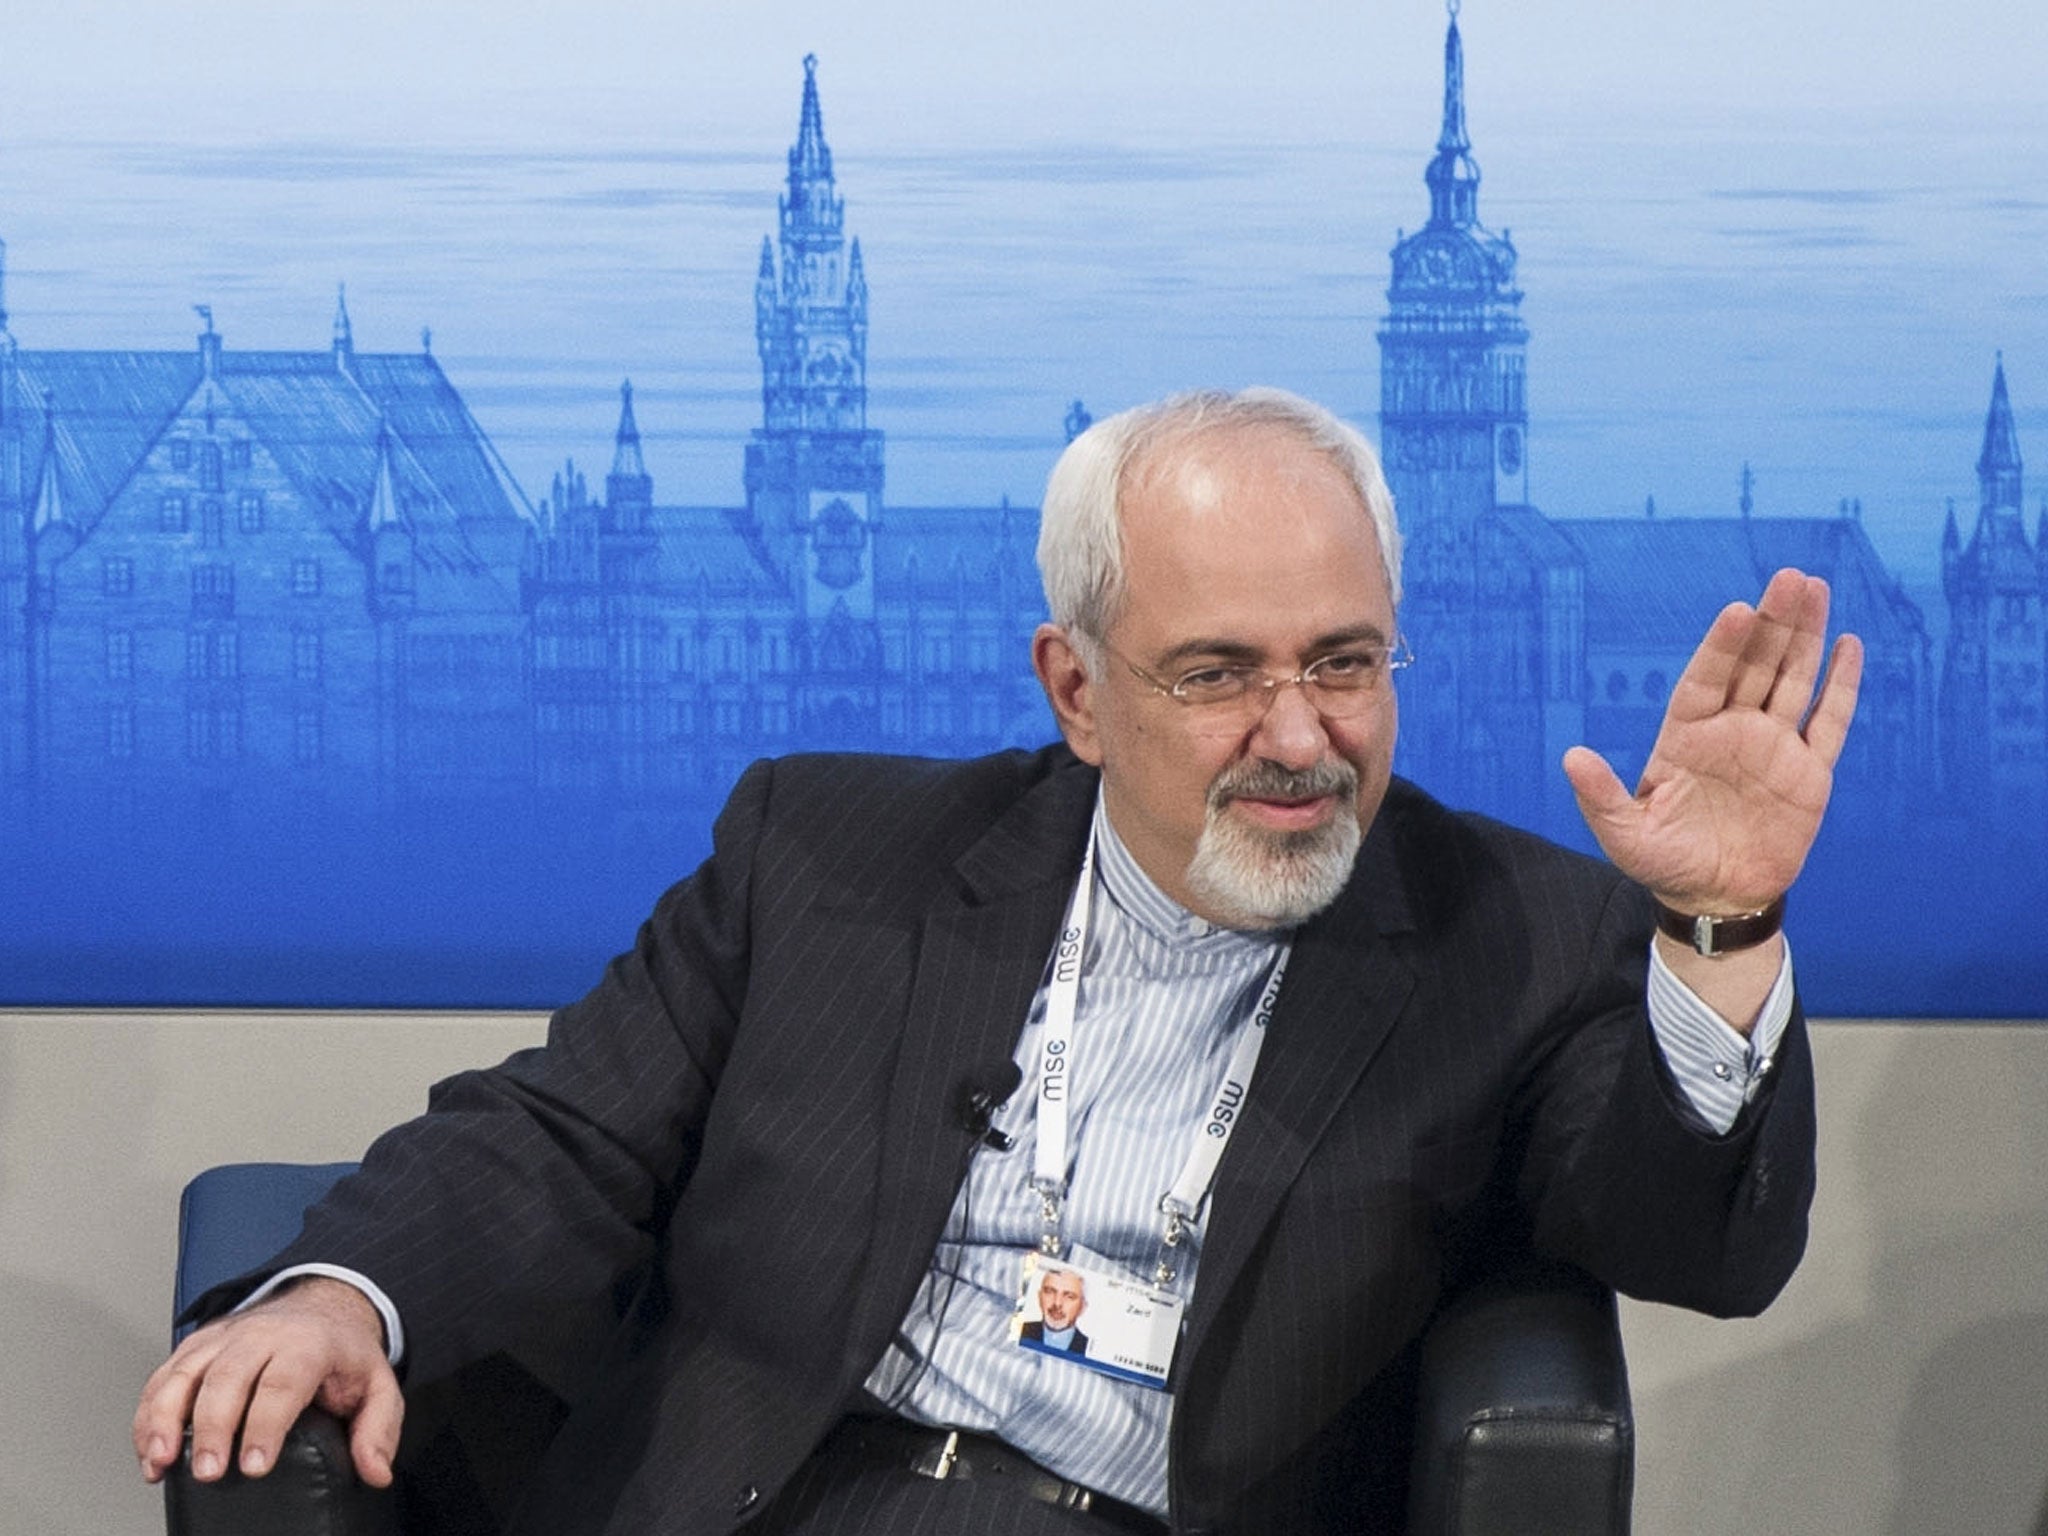 Minister Mohammad Javad Zarif was in Germany for the annual Munich Security Conference